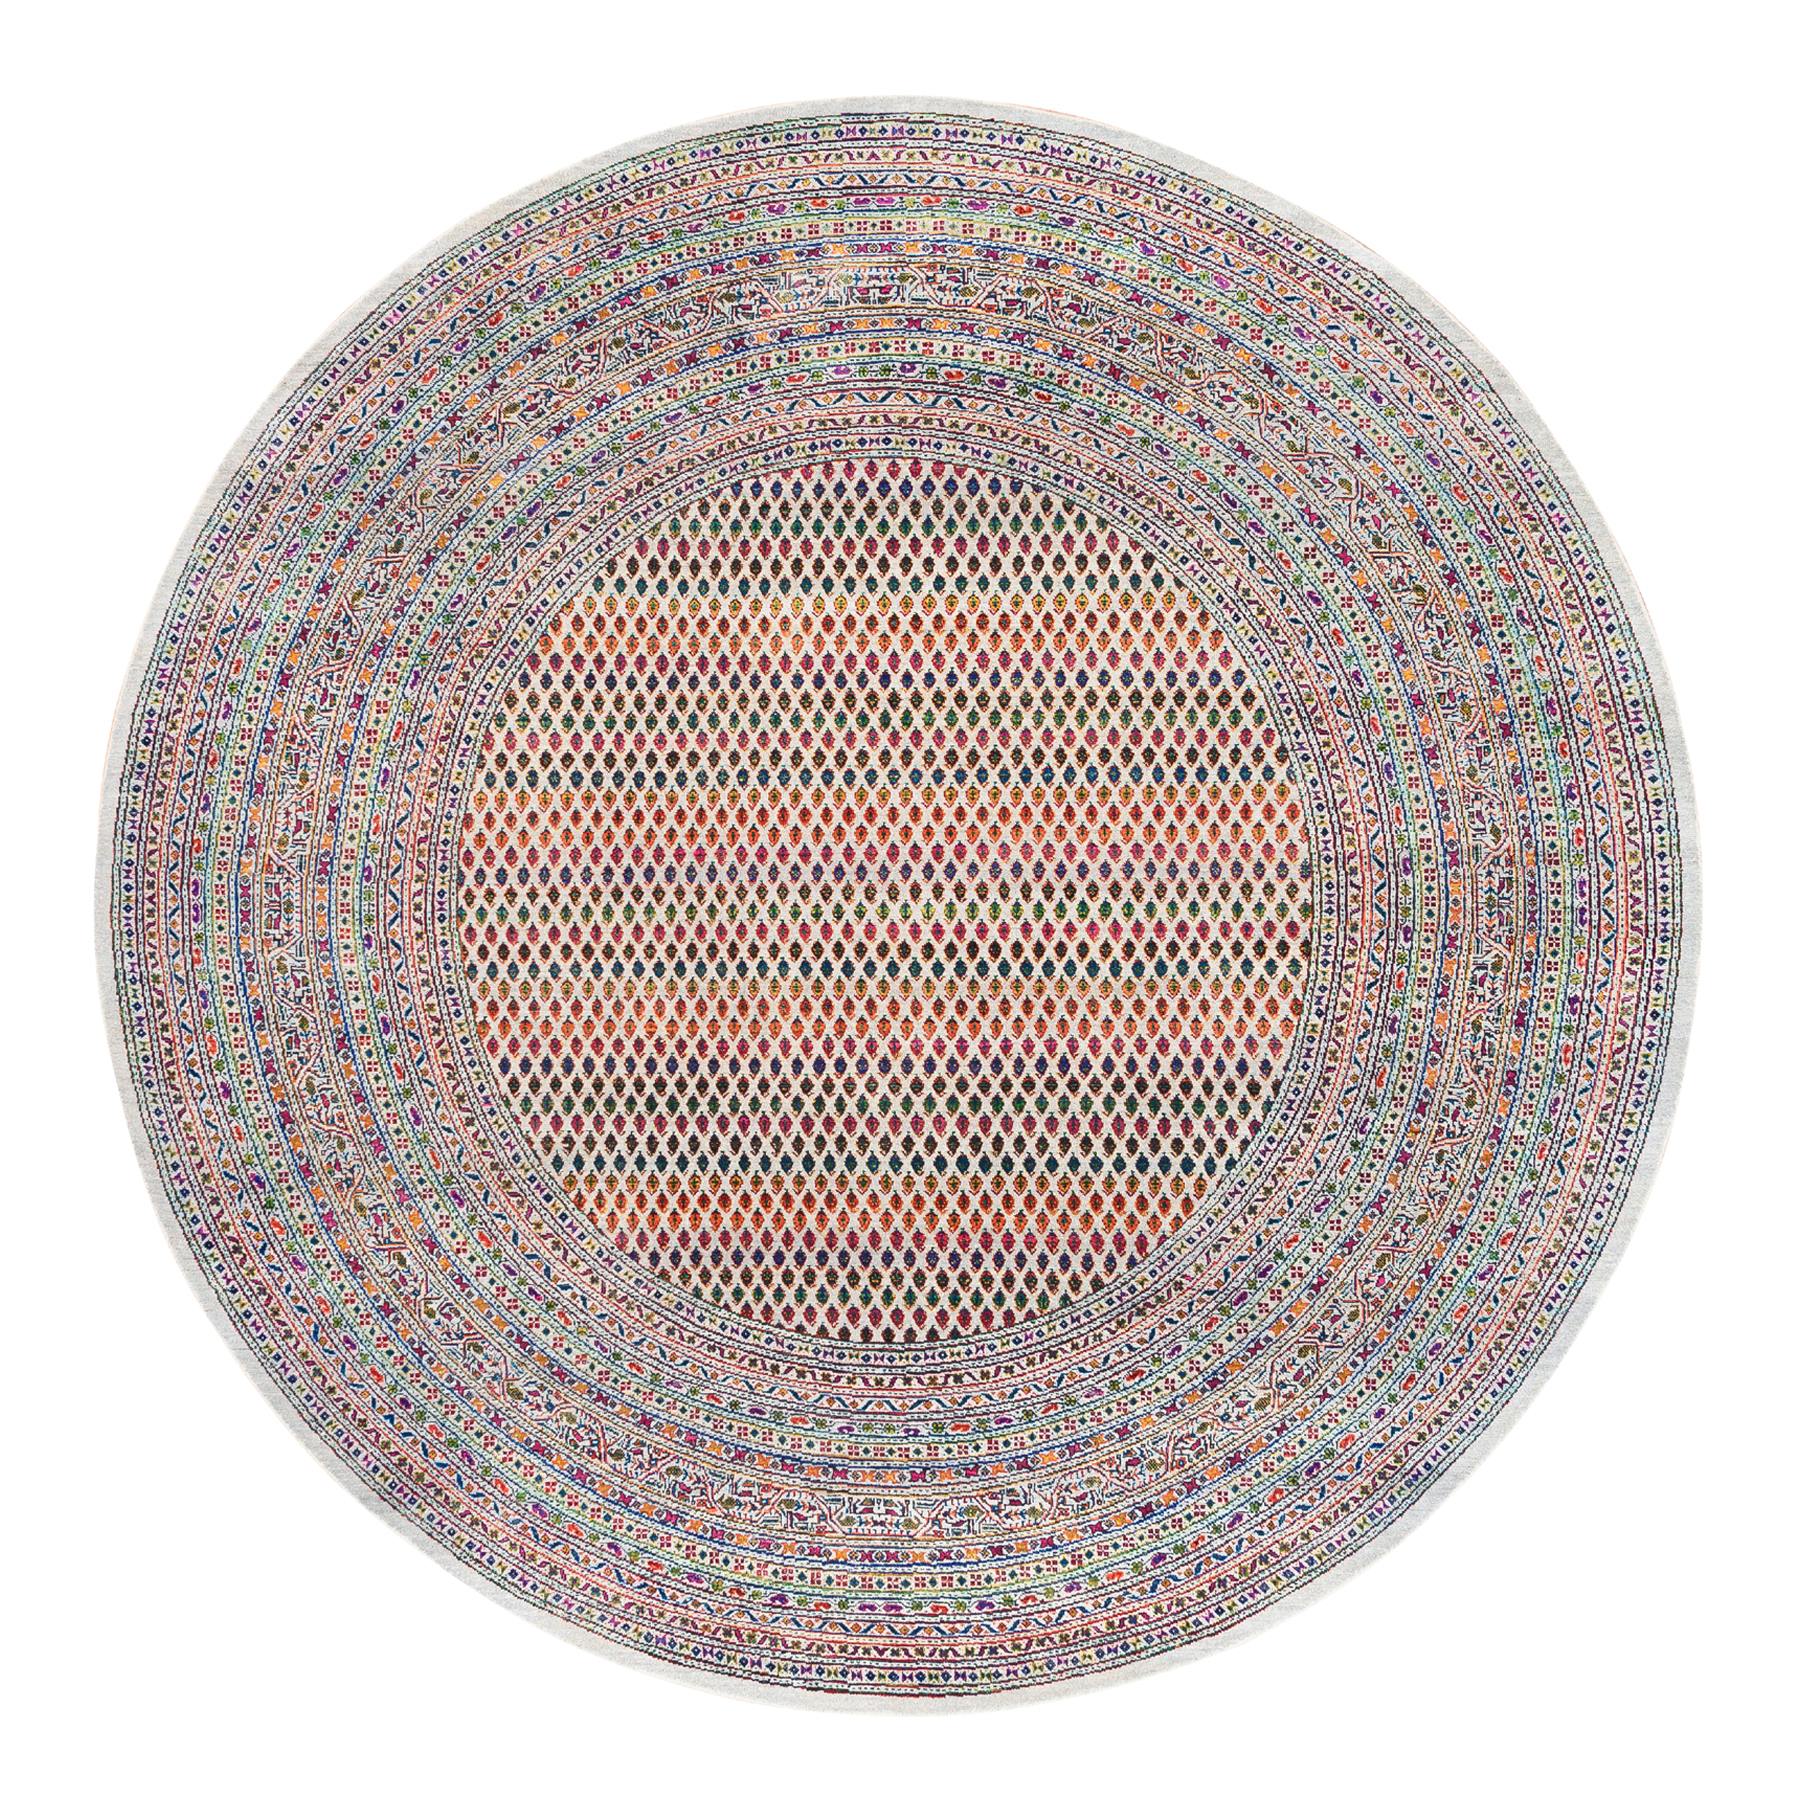 10'x10' Round Colorful Wool And Sari Silk Sarouk Mir Inspired With Small Boteh Design Hand Woven Oriental Rug 